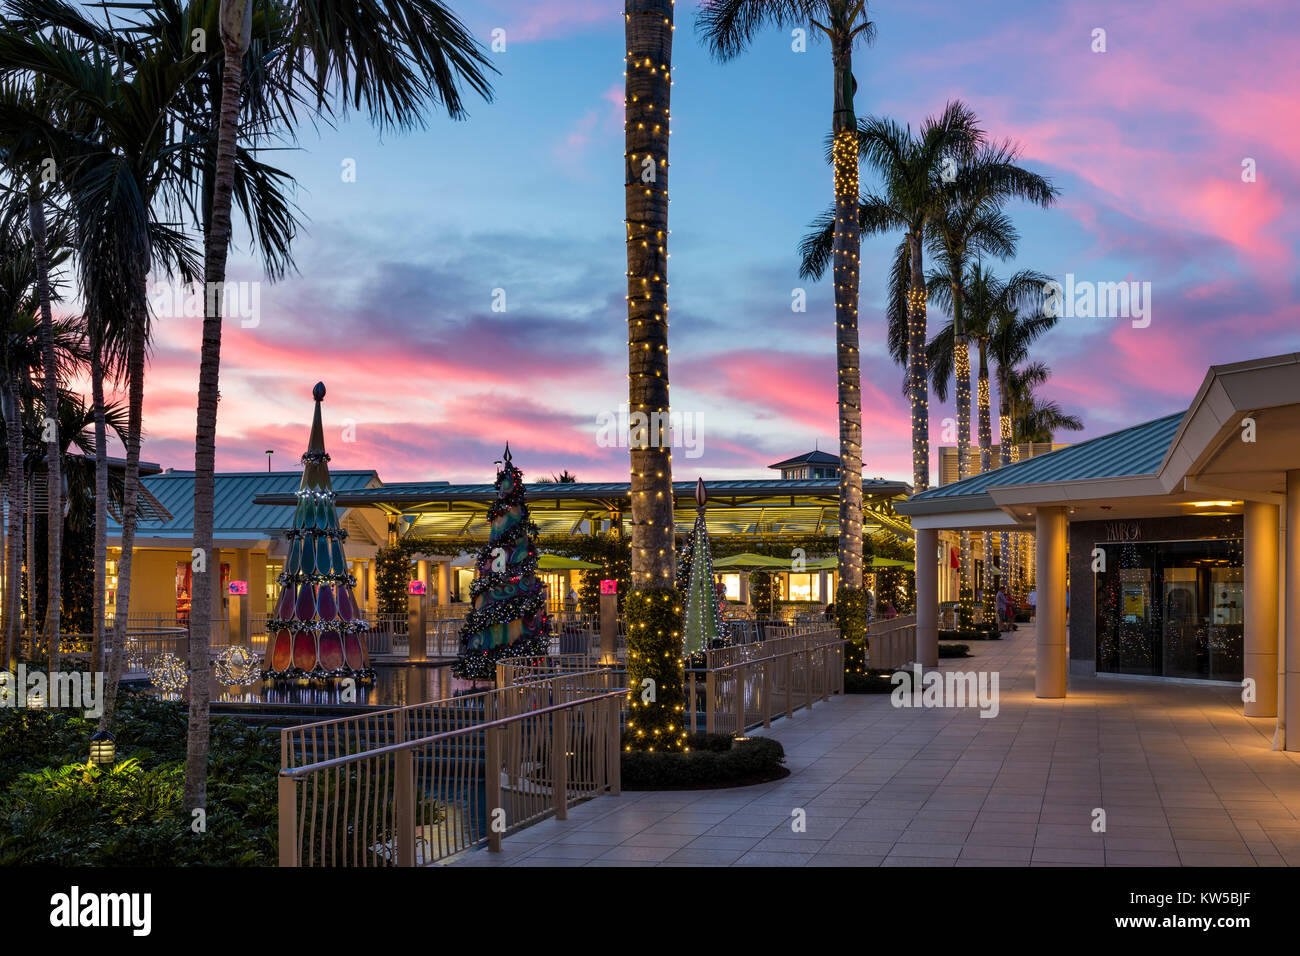 Christmas decorations and colorful sunset at the Waterside Shops - an upscale open-air mall, Naples, Florida Stock Photo